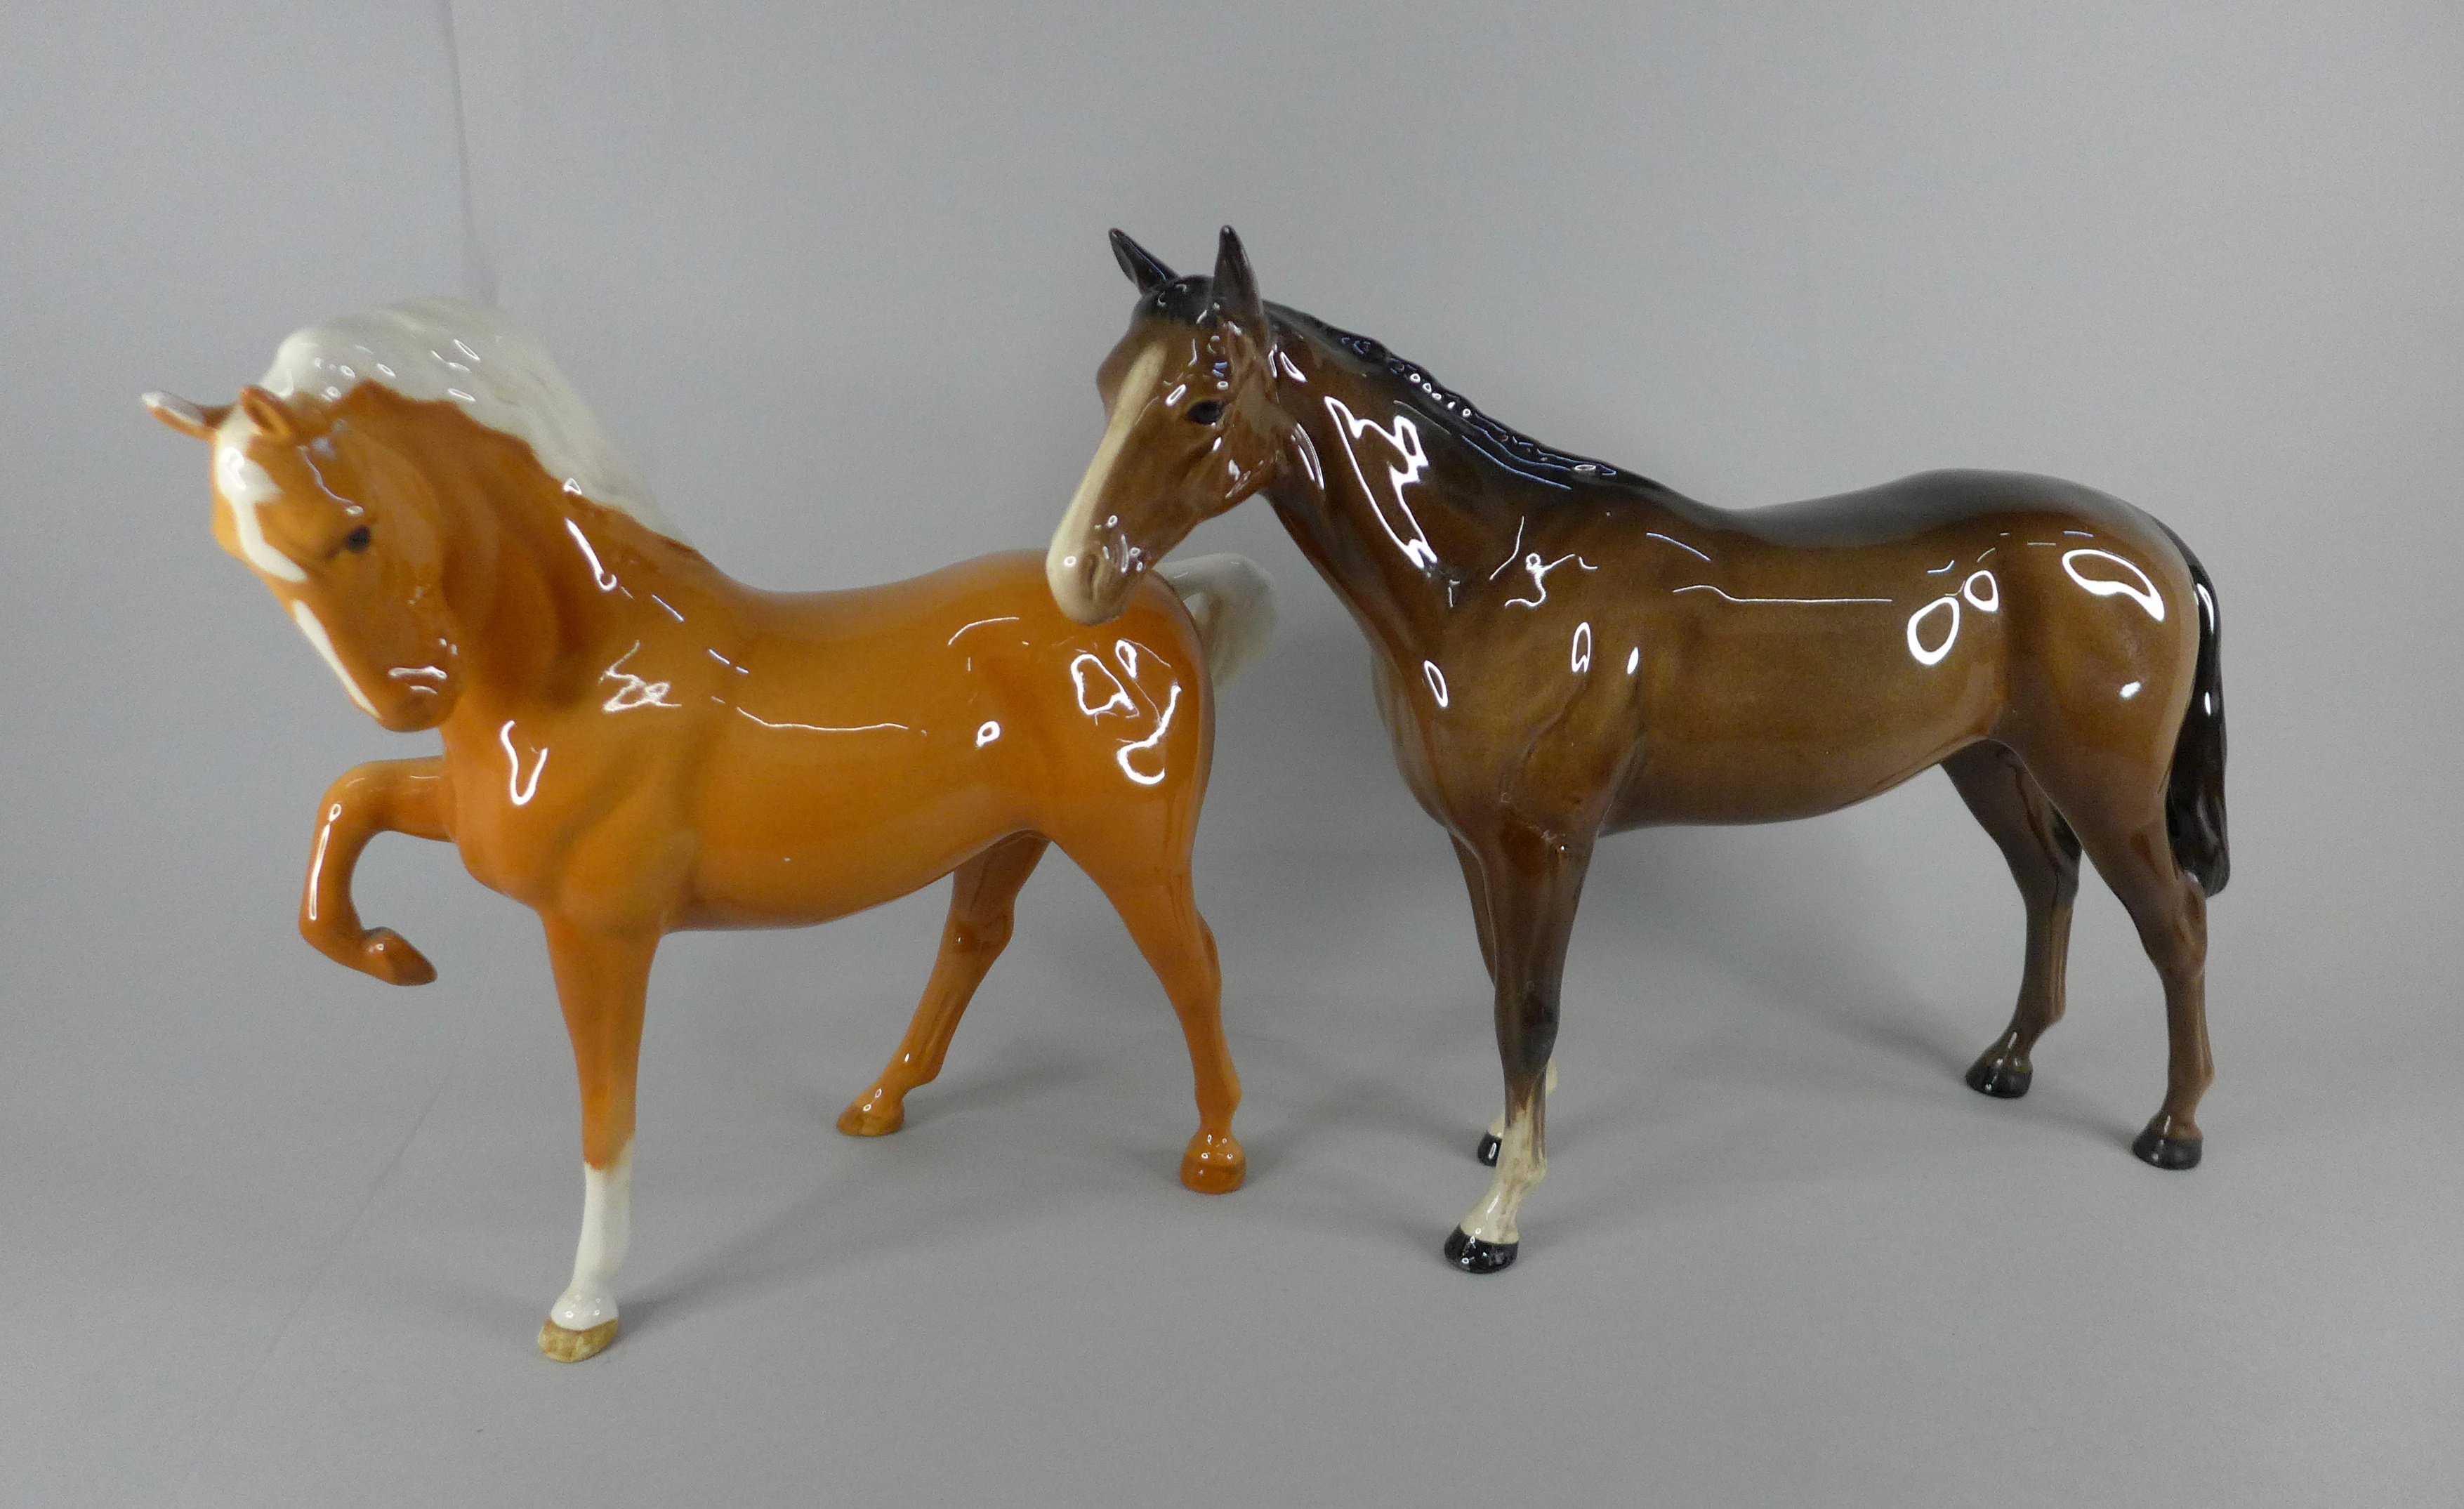 Two Beswick horses, both a/f (ears chipped/restored)